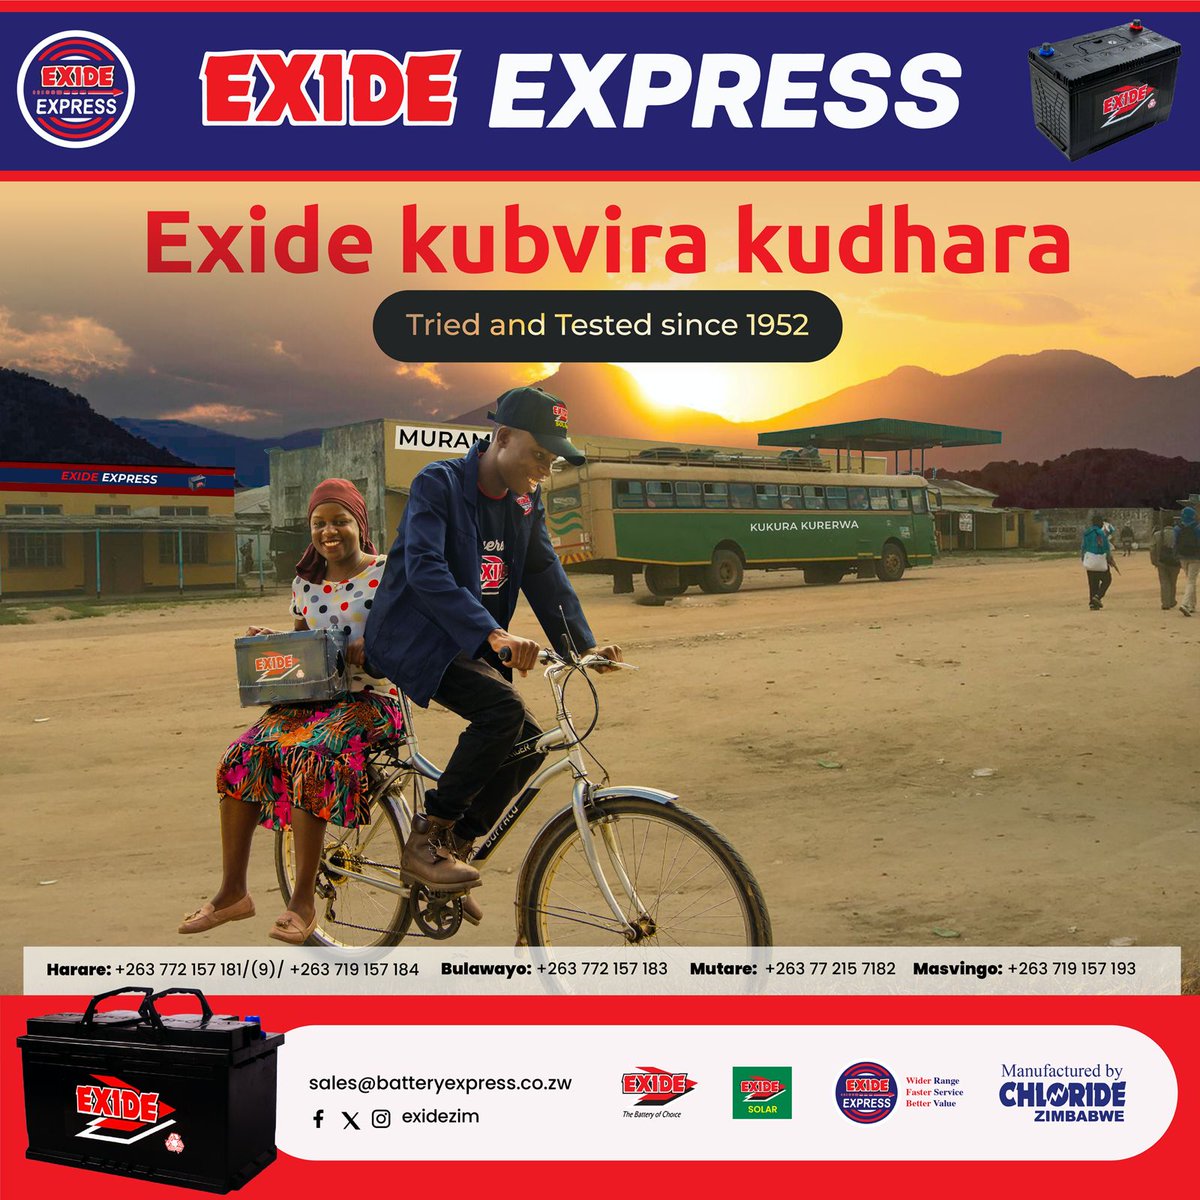 We produce quality, durable & reliable batteries. Do the right thing, buy the original tried and tested Exide battery from our nationwide Exide Express shops or authorized dealers. #thebatteryofchoice #triedandtestedsince1952 @KUDZIELISTER2 @Mavhure @IdeasZaka @EsteemComms